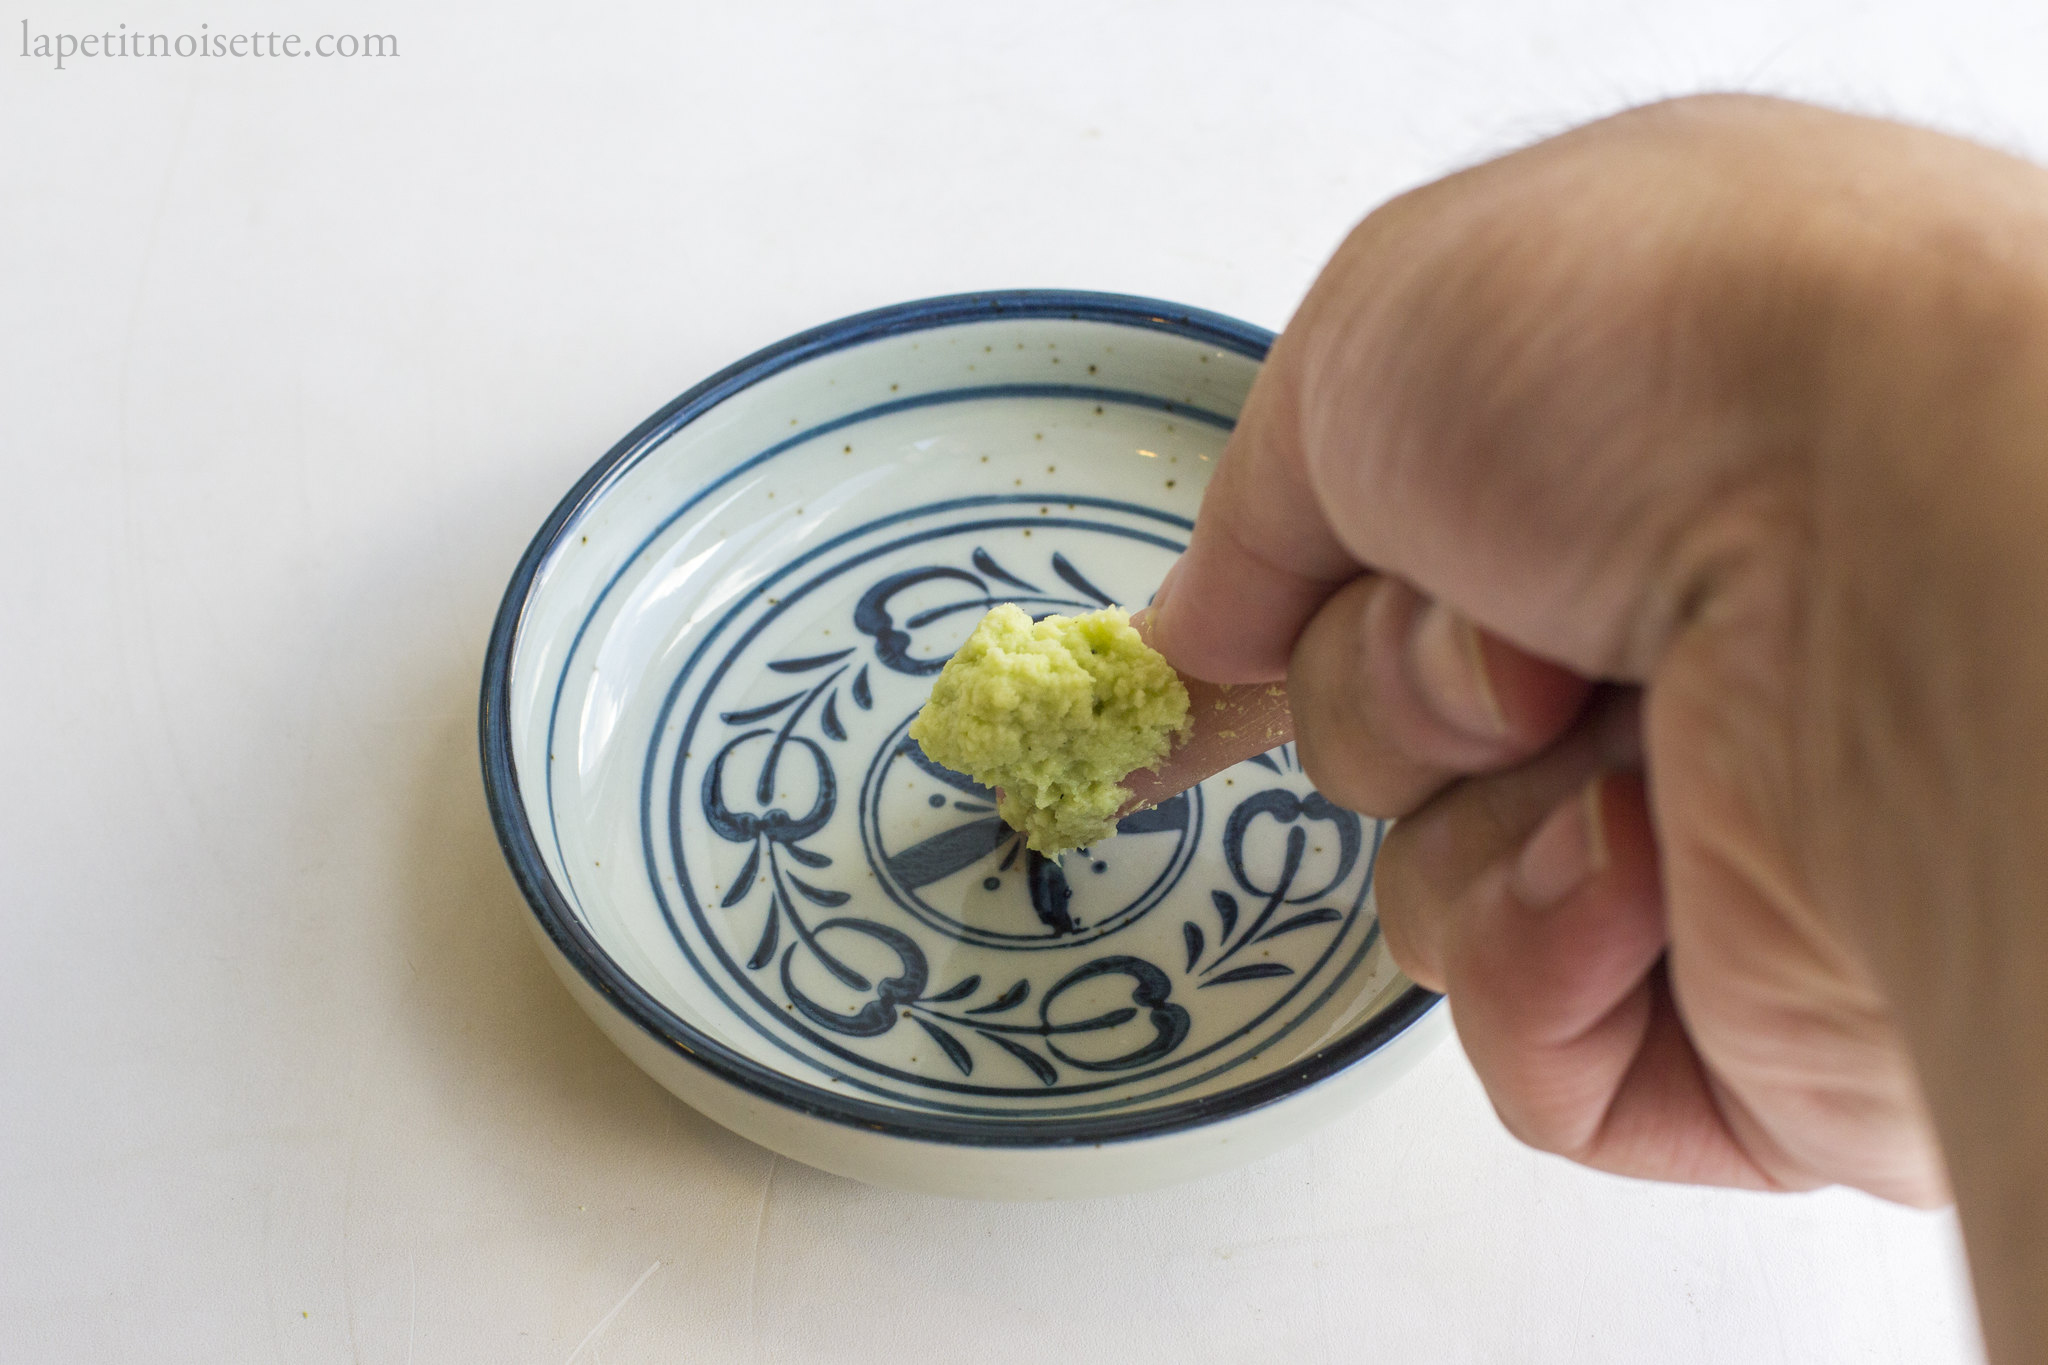 The technique for serving wasabi at a restaurant using your fingers.